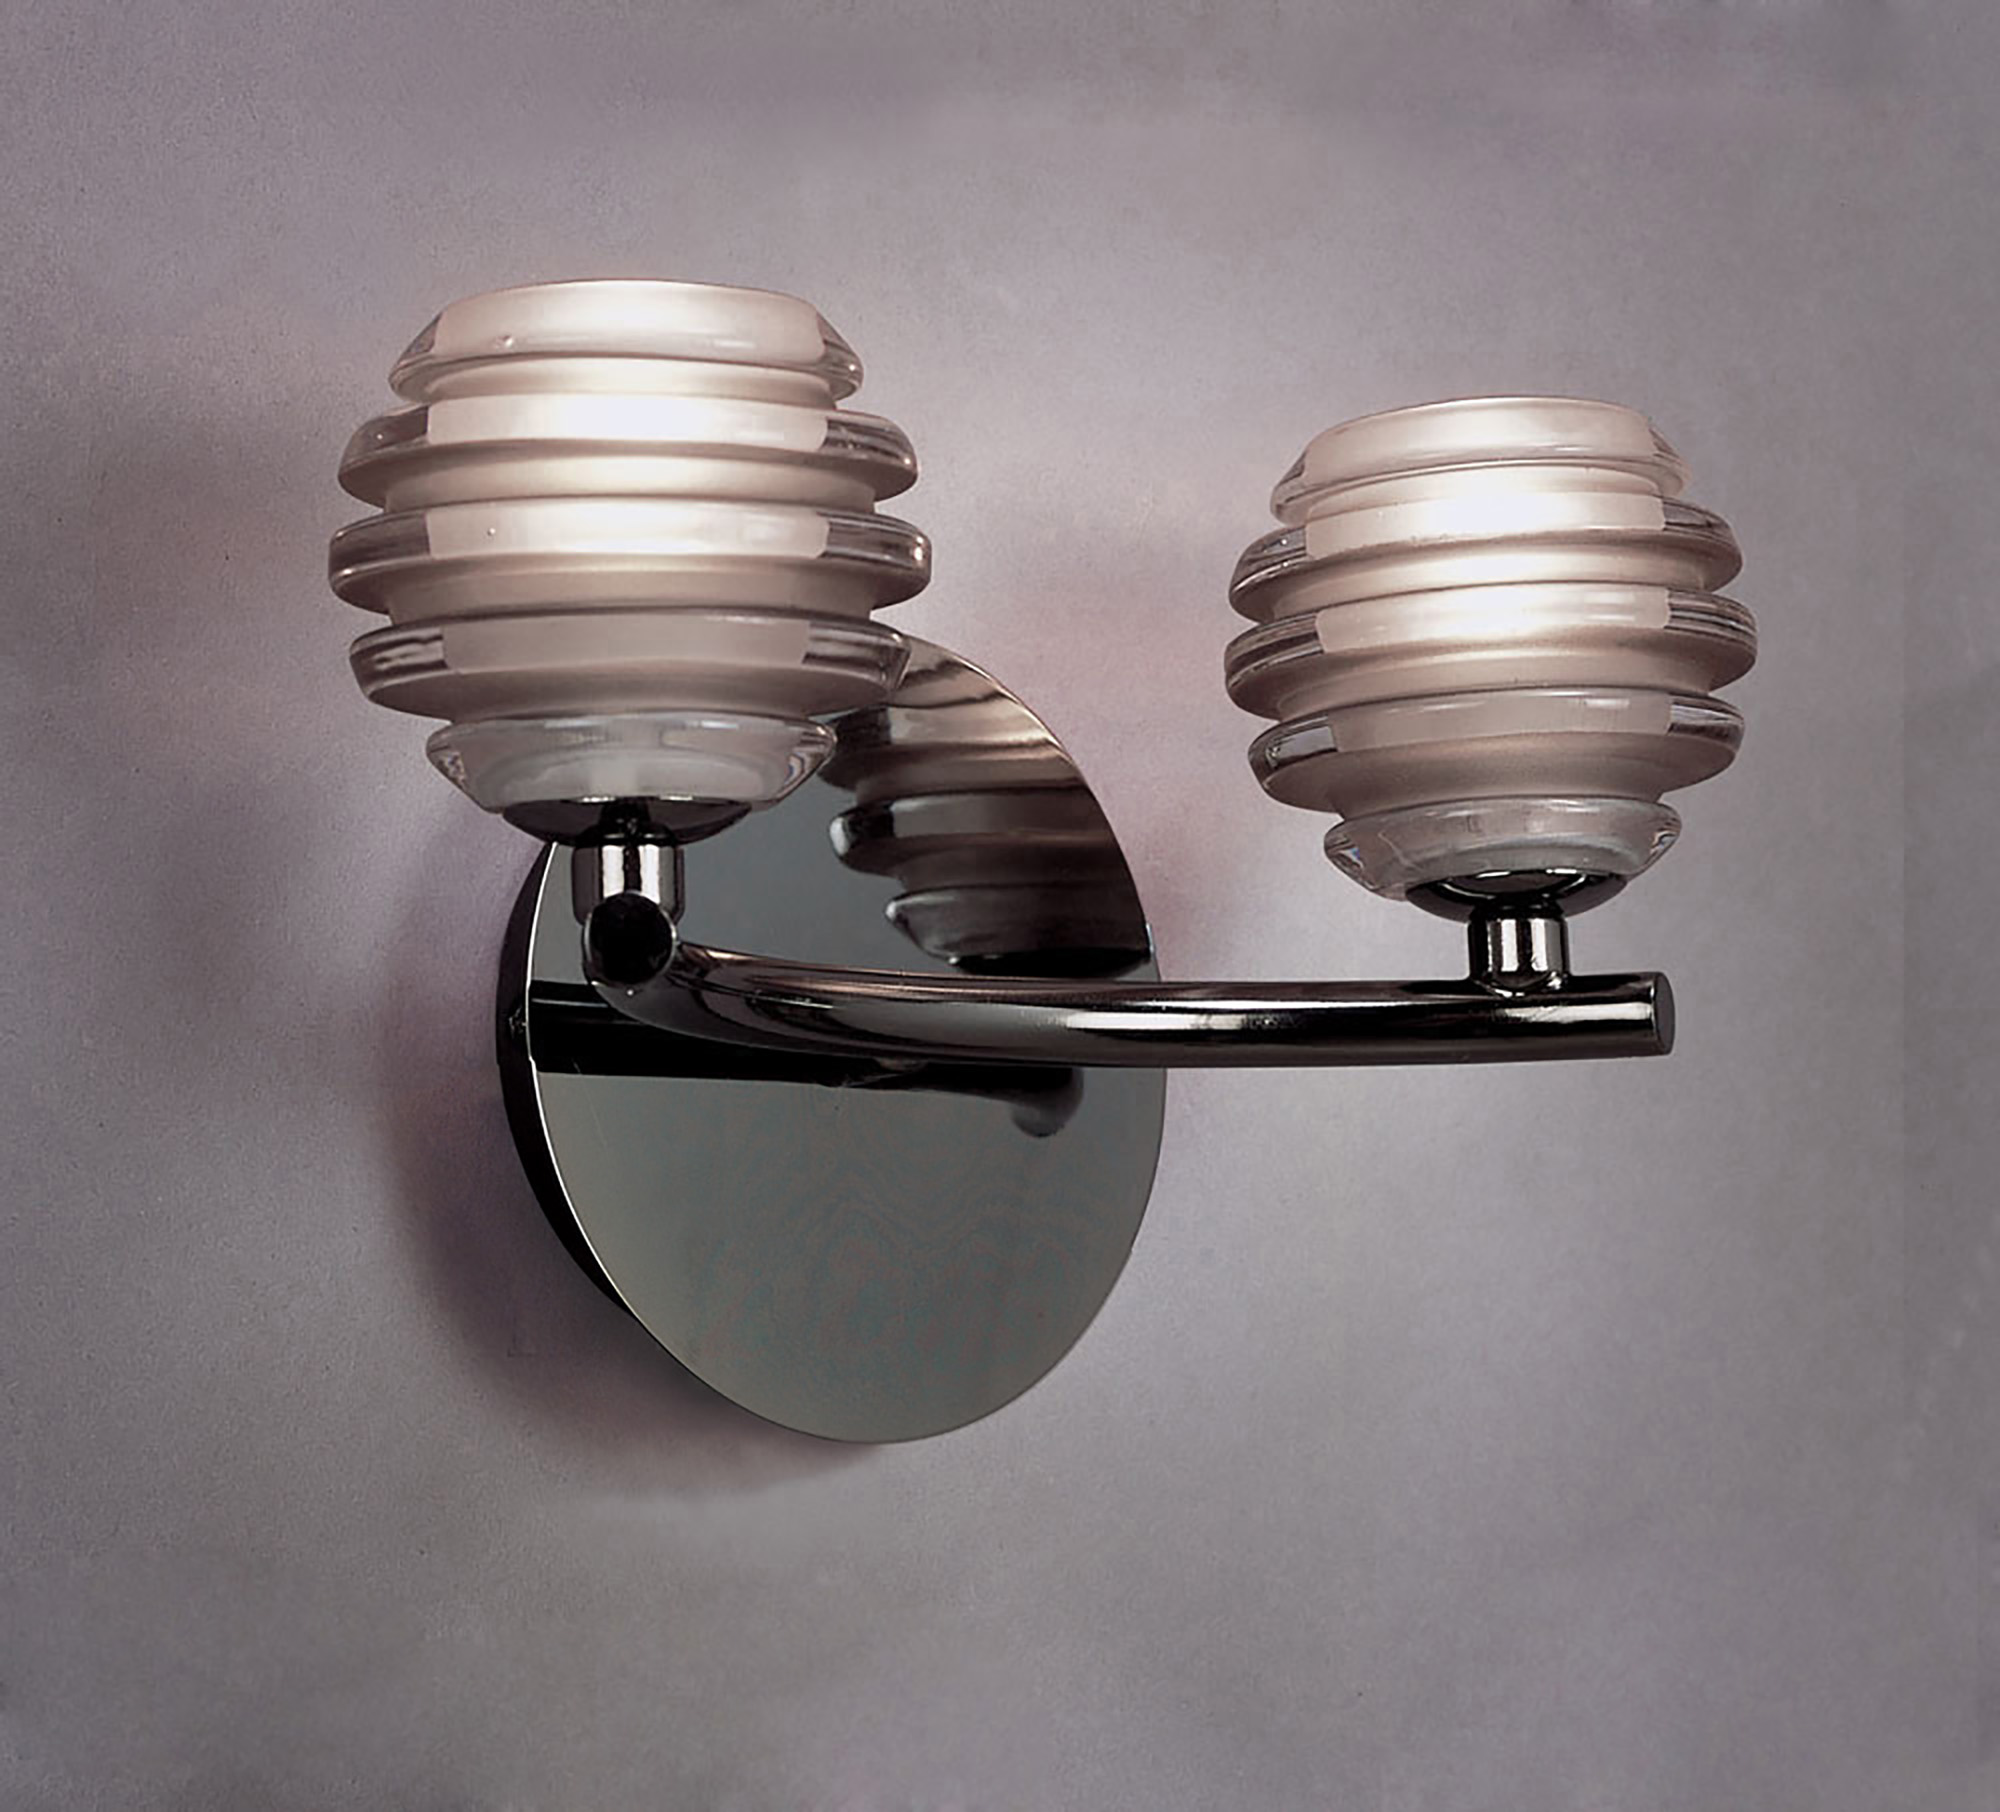 Sphere BC Wall Lights Mantra Armed Wall Lights